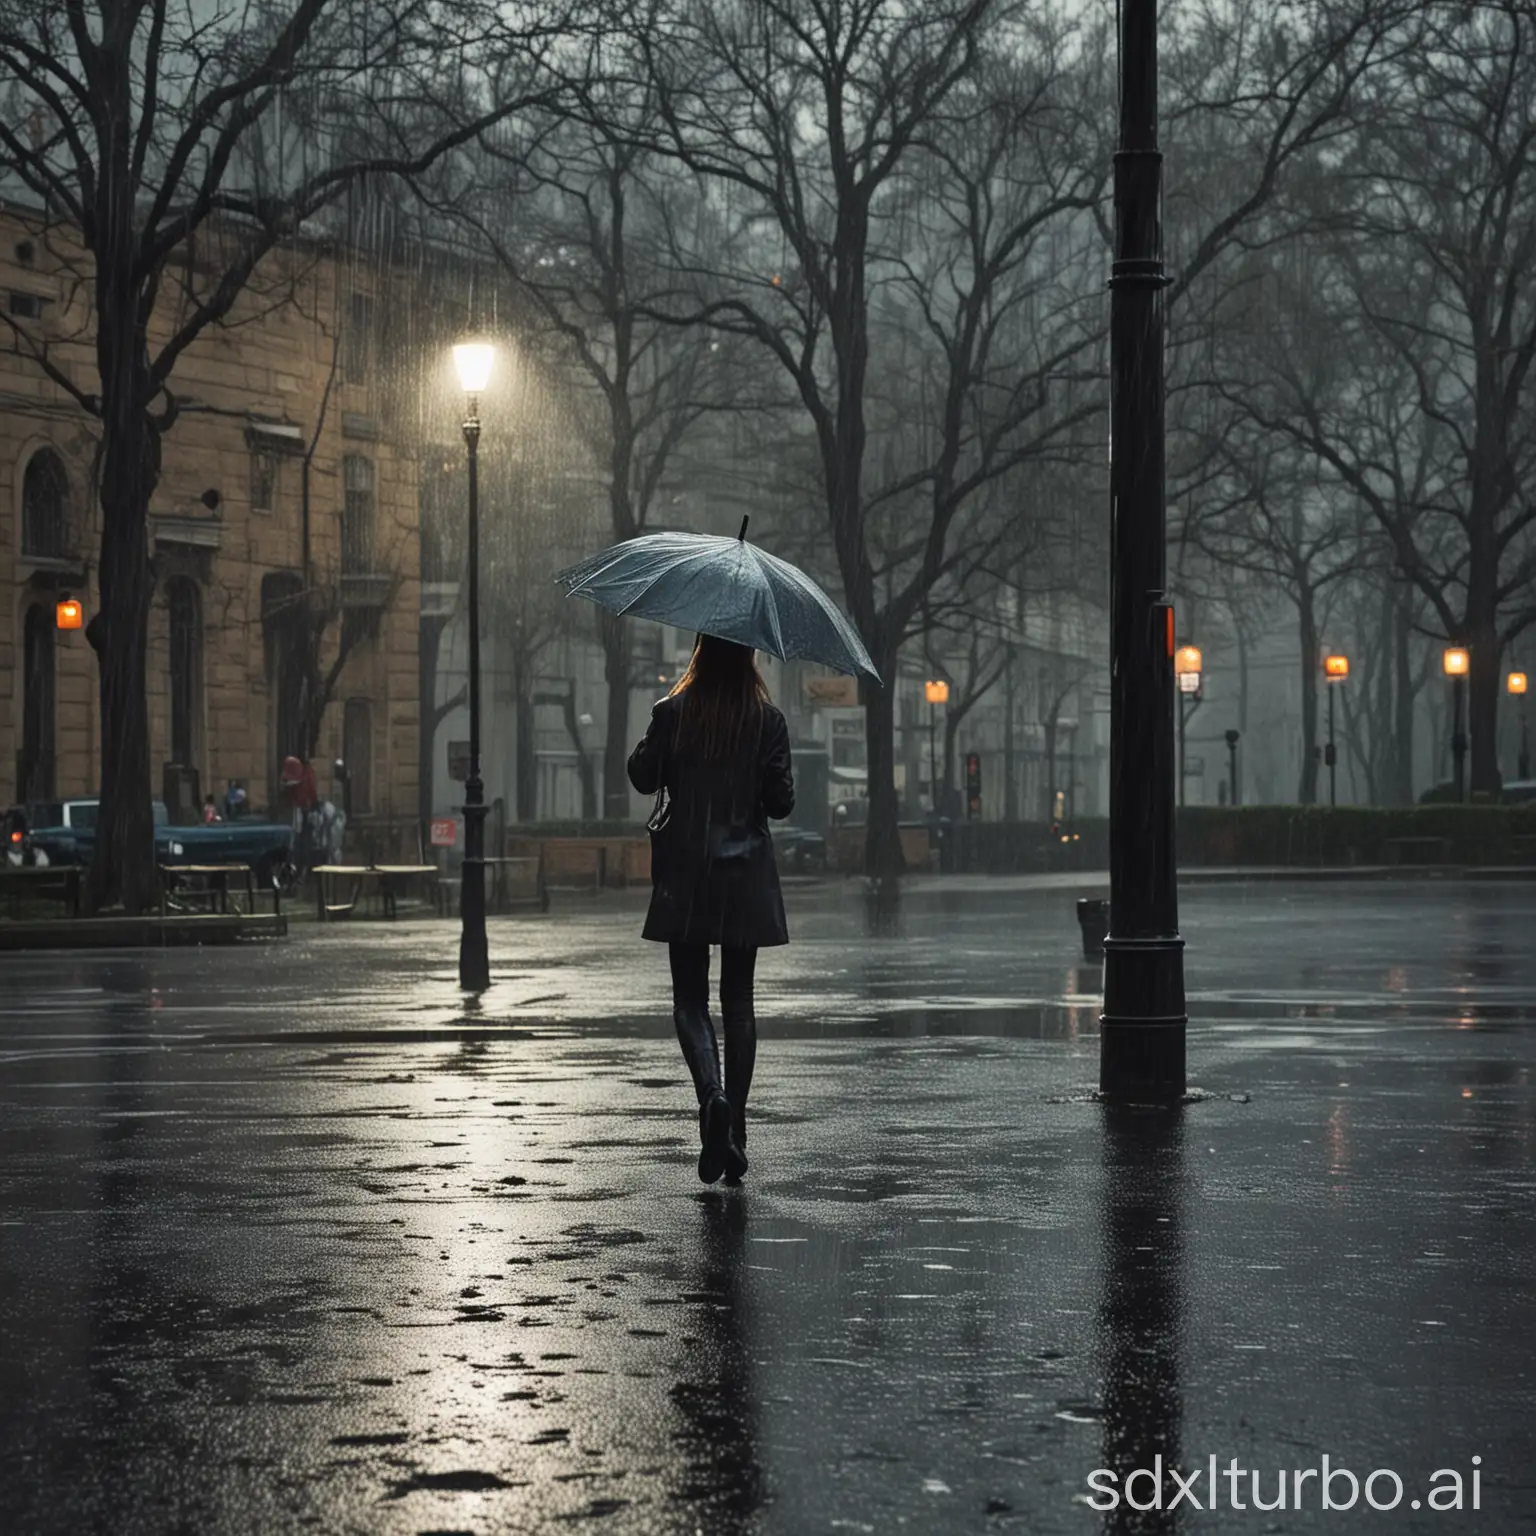 People-Walking-in-the-Rain-on-City-Streets